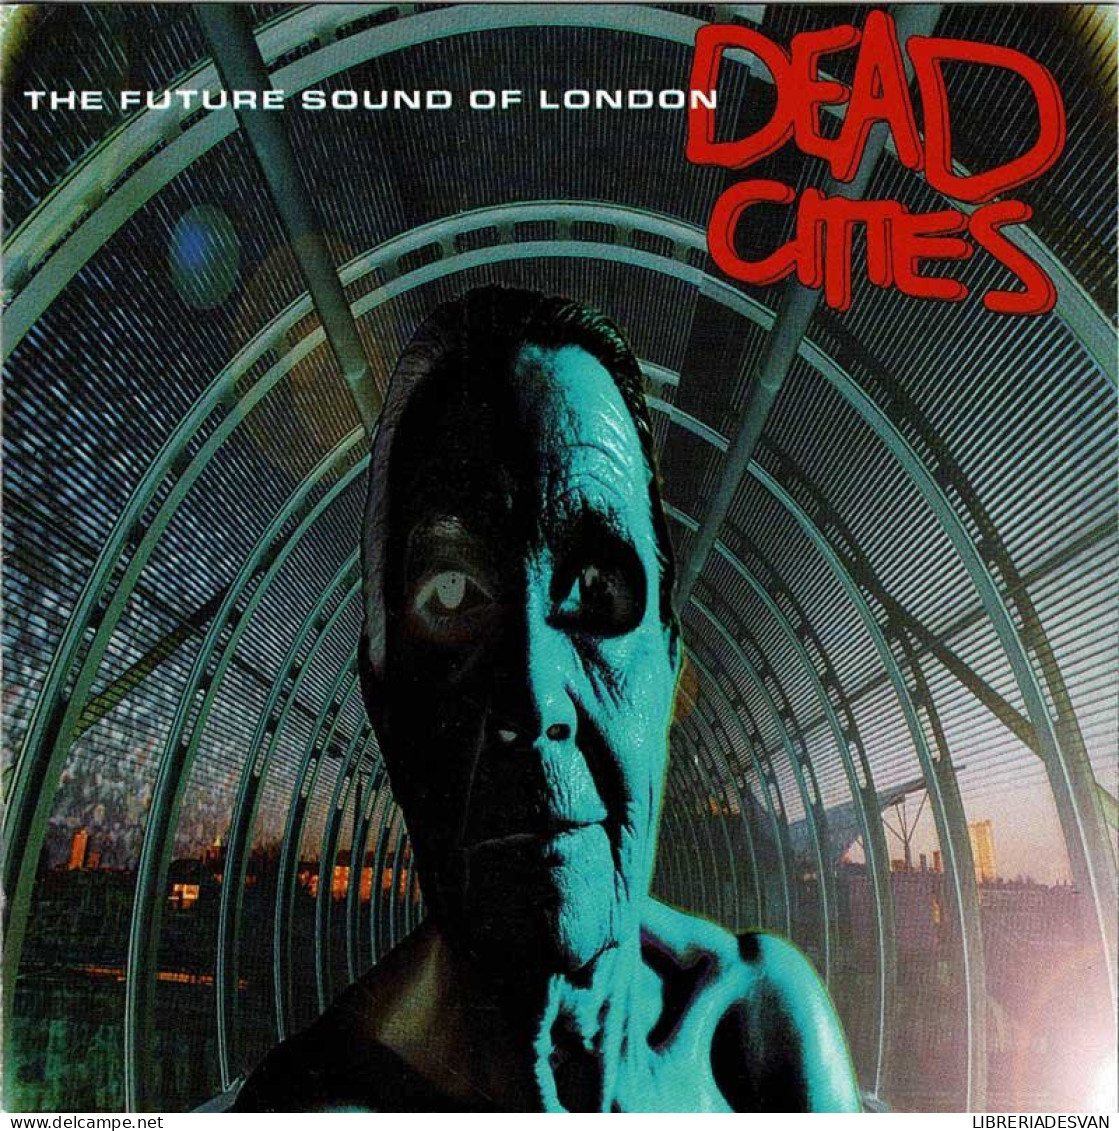 The Future Sound Of London - Dead Cities. CD - Dance, Techno & House